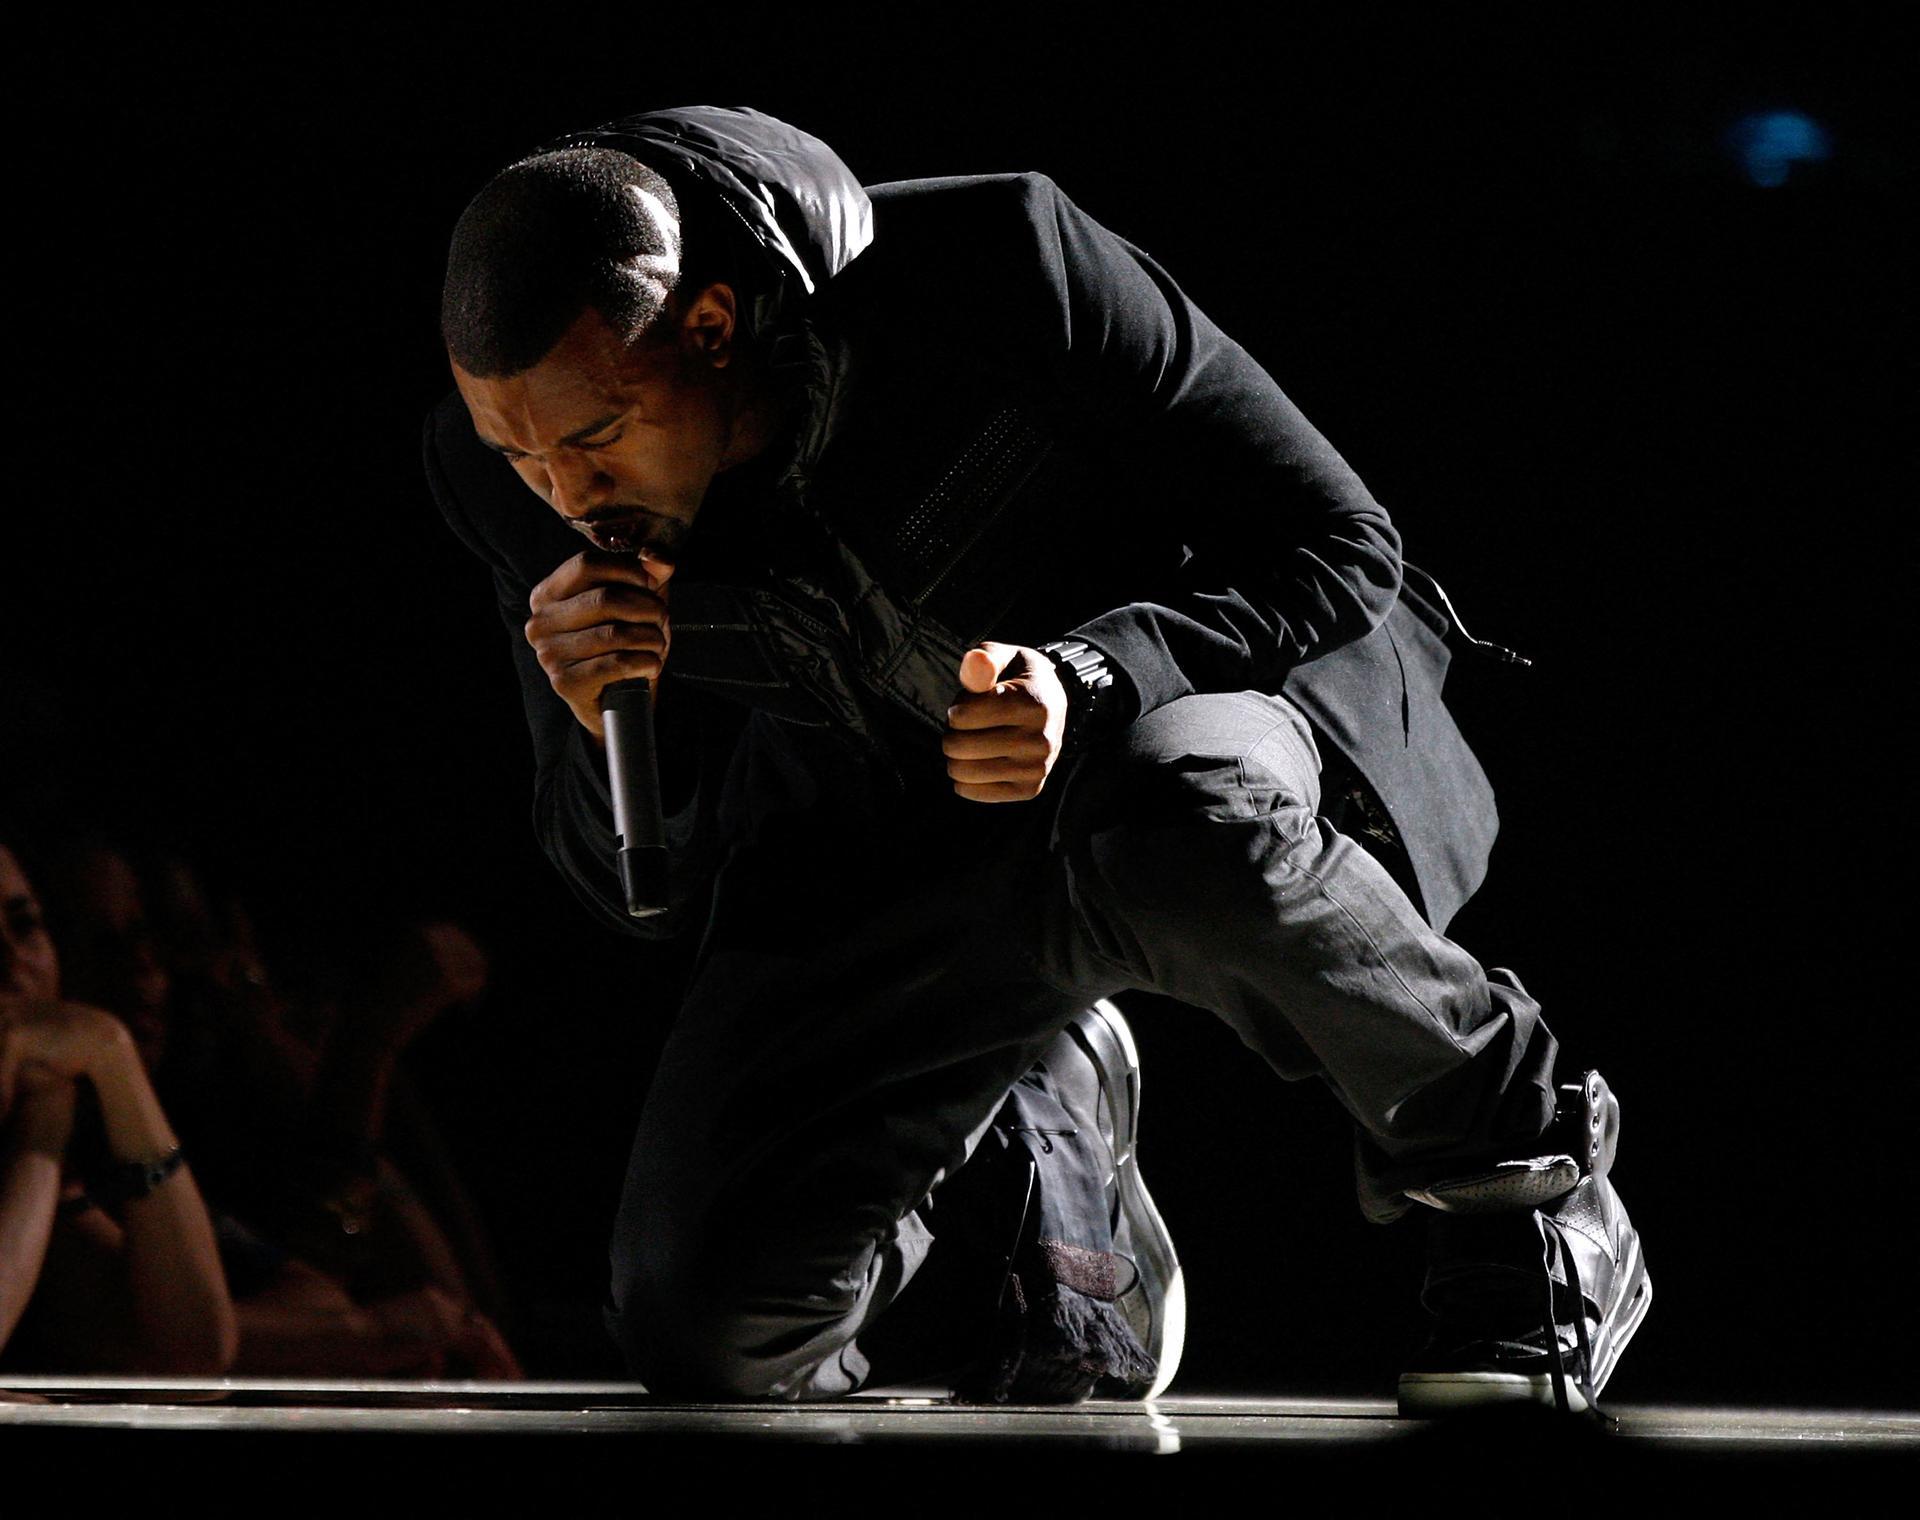 Immortal soles: Kanye West Nikes shatter sneaker record at auction, Fashion